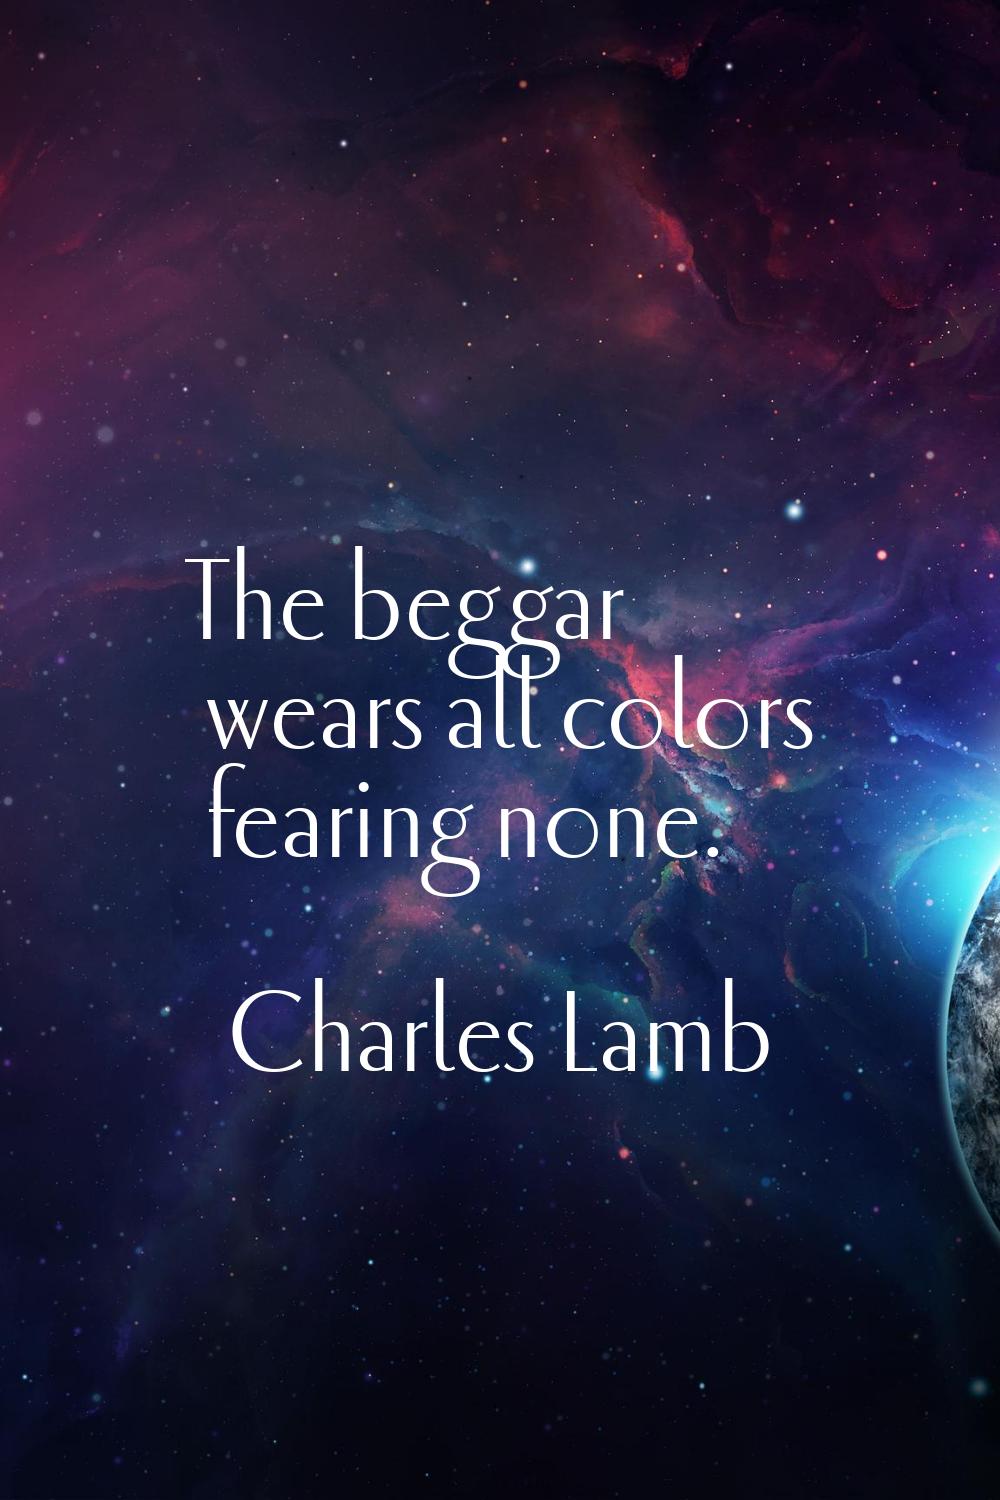 The beggar wears all colors fearing none.